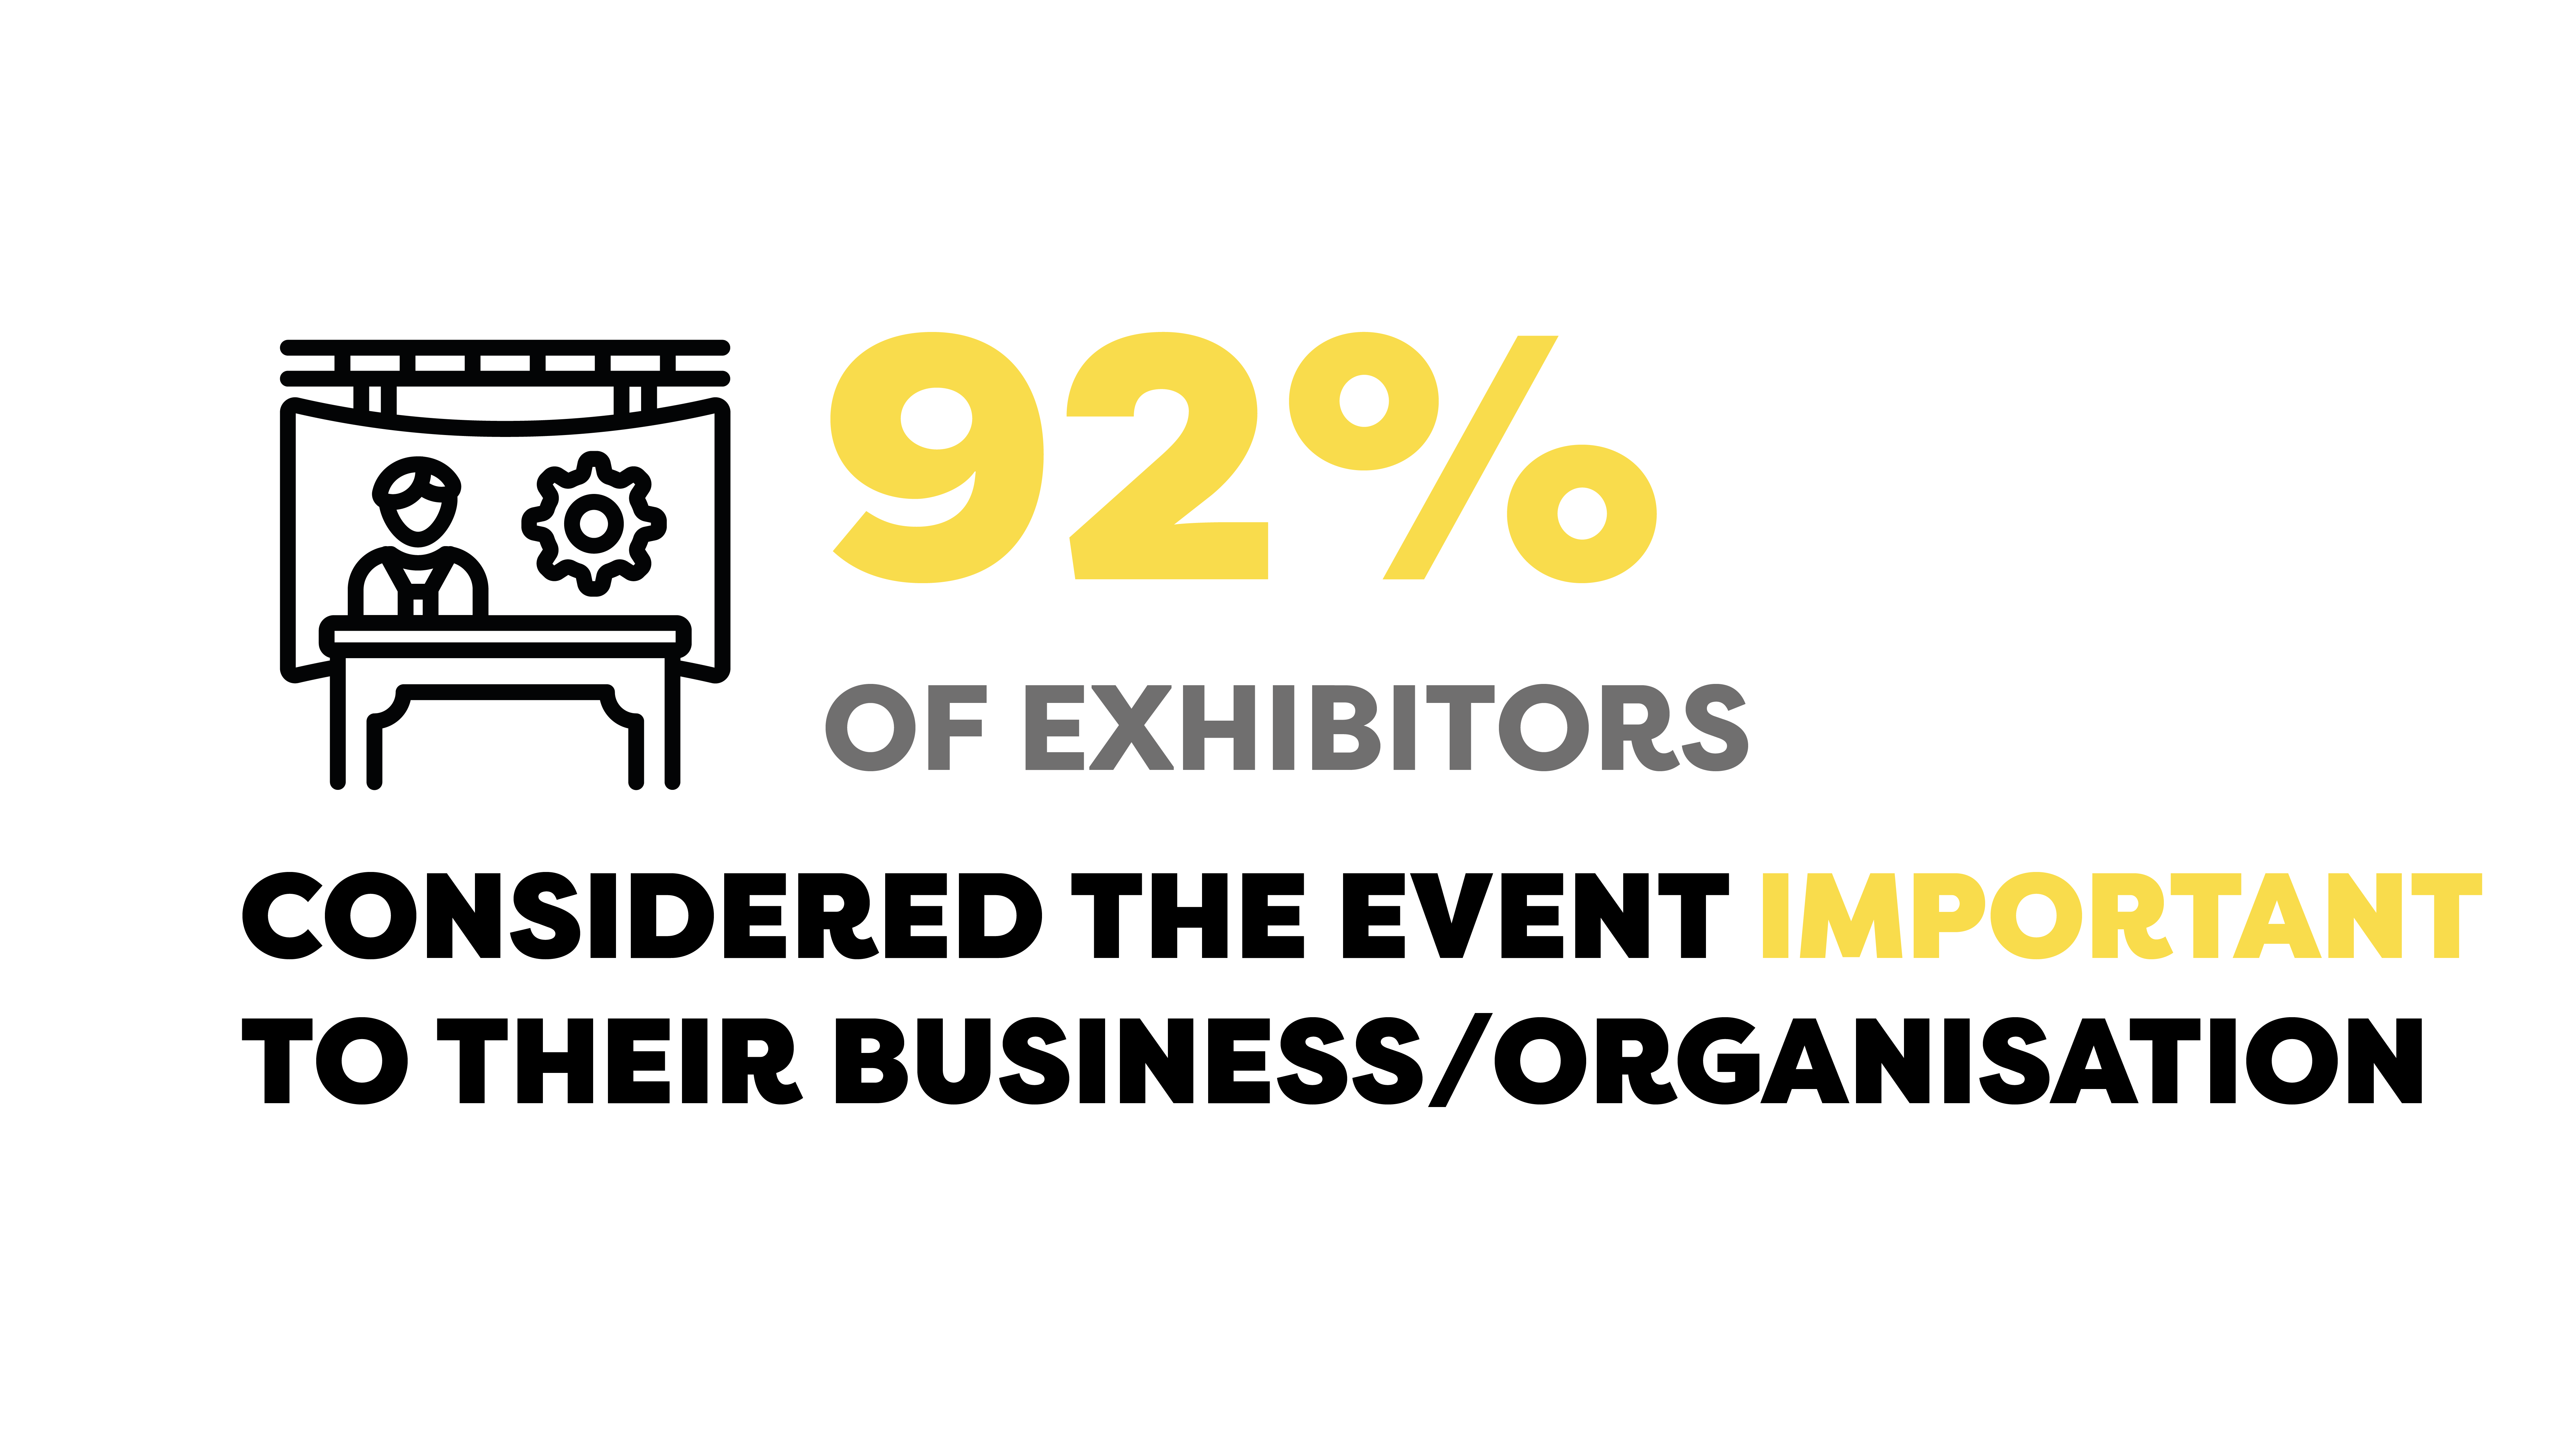 92% of exhibitors considered the event important to their business/organisation